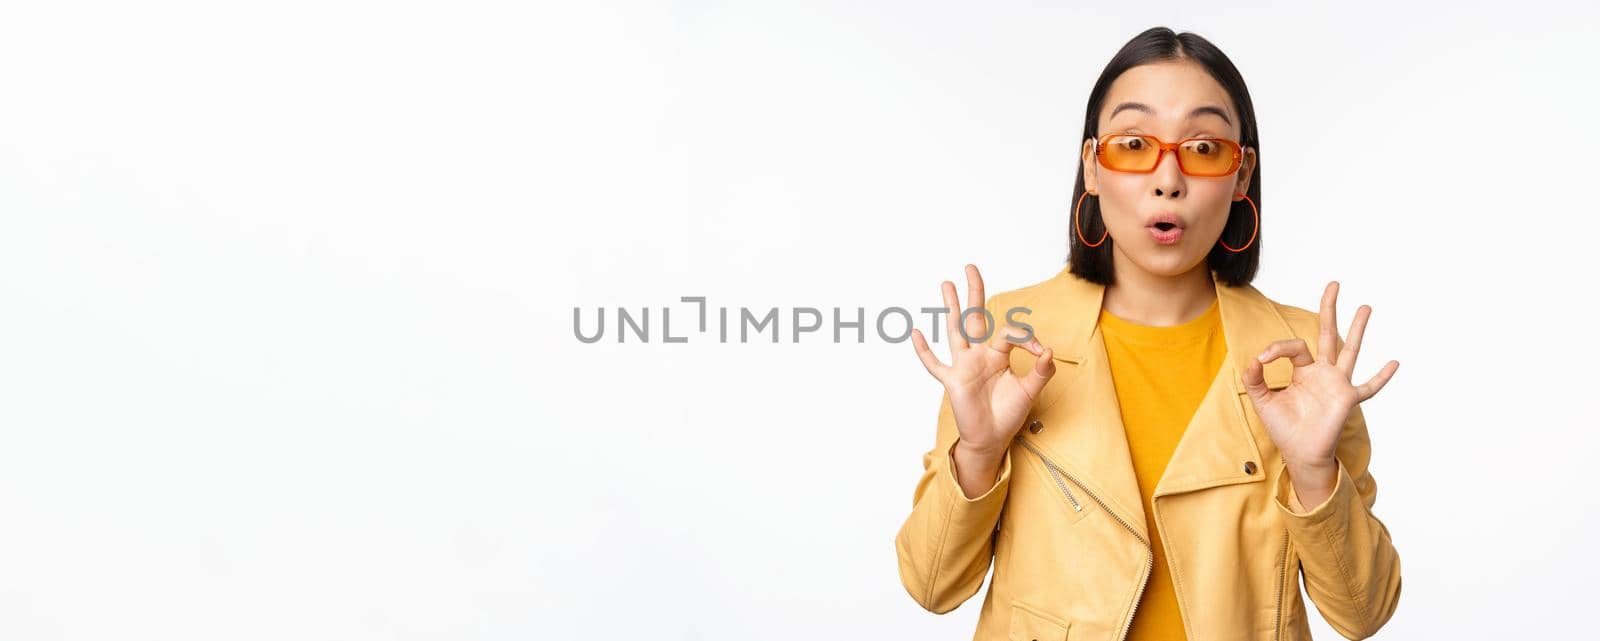 Enthusiastic asian girl in sunglasses, shows okay, ok sign in approval, smiling and laughing, approve, recommend smth, praise and compliment, standing over white background.